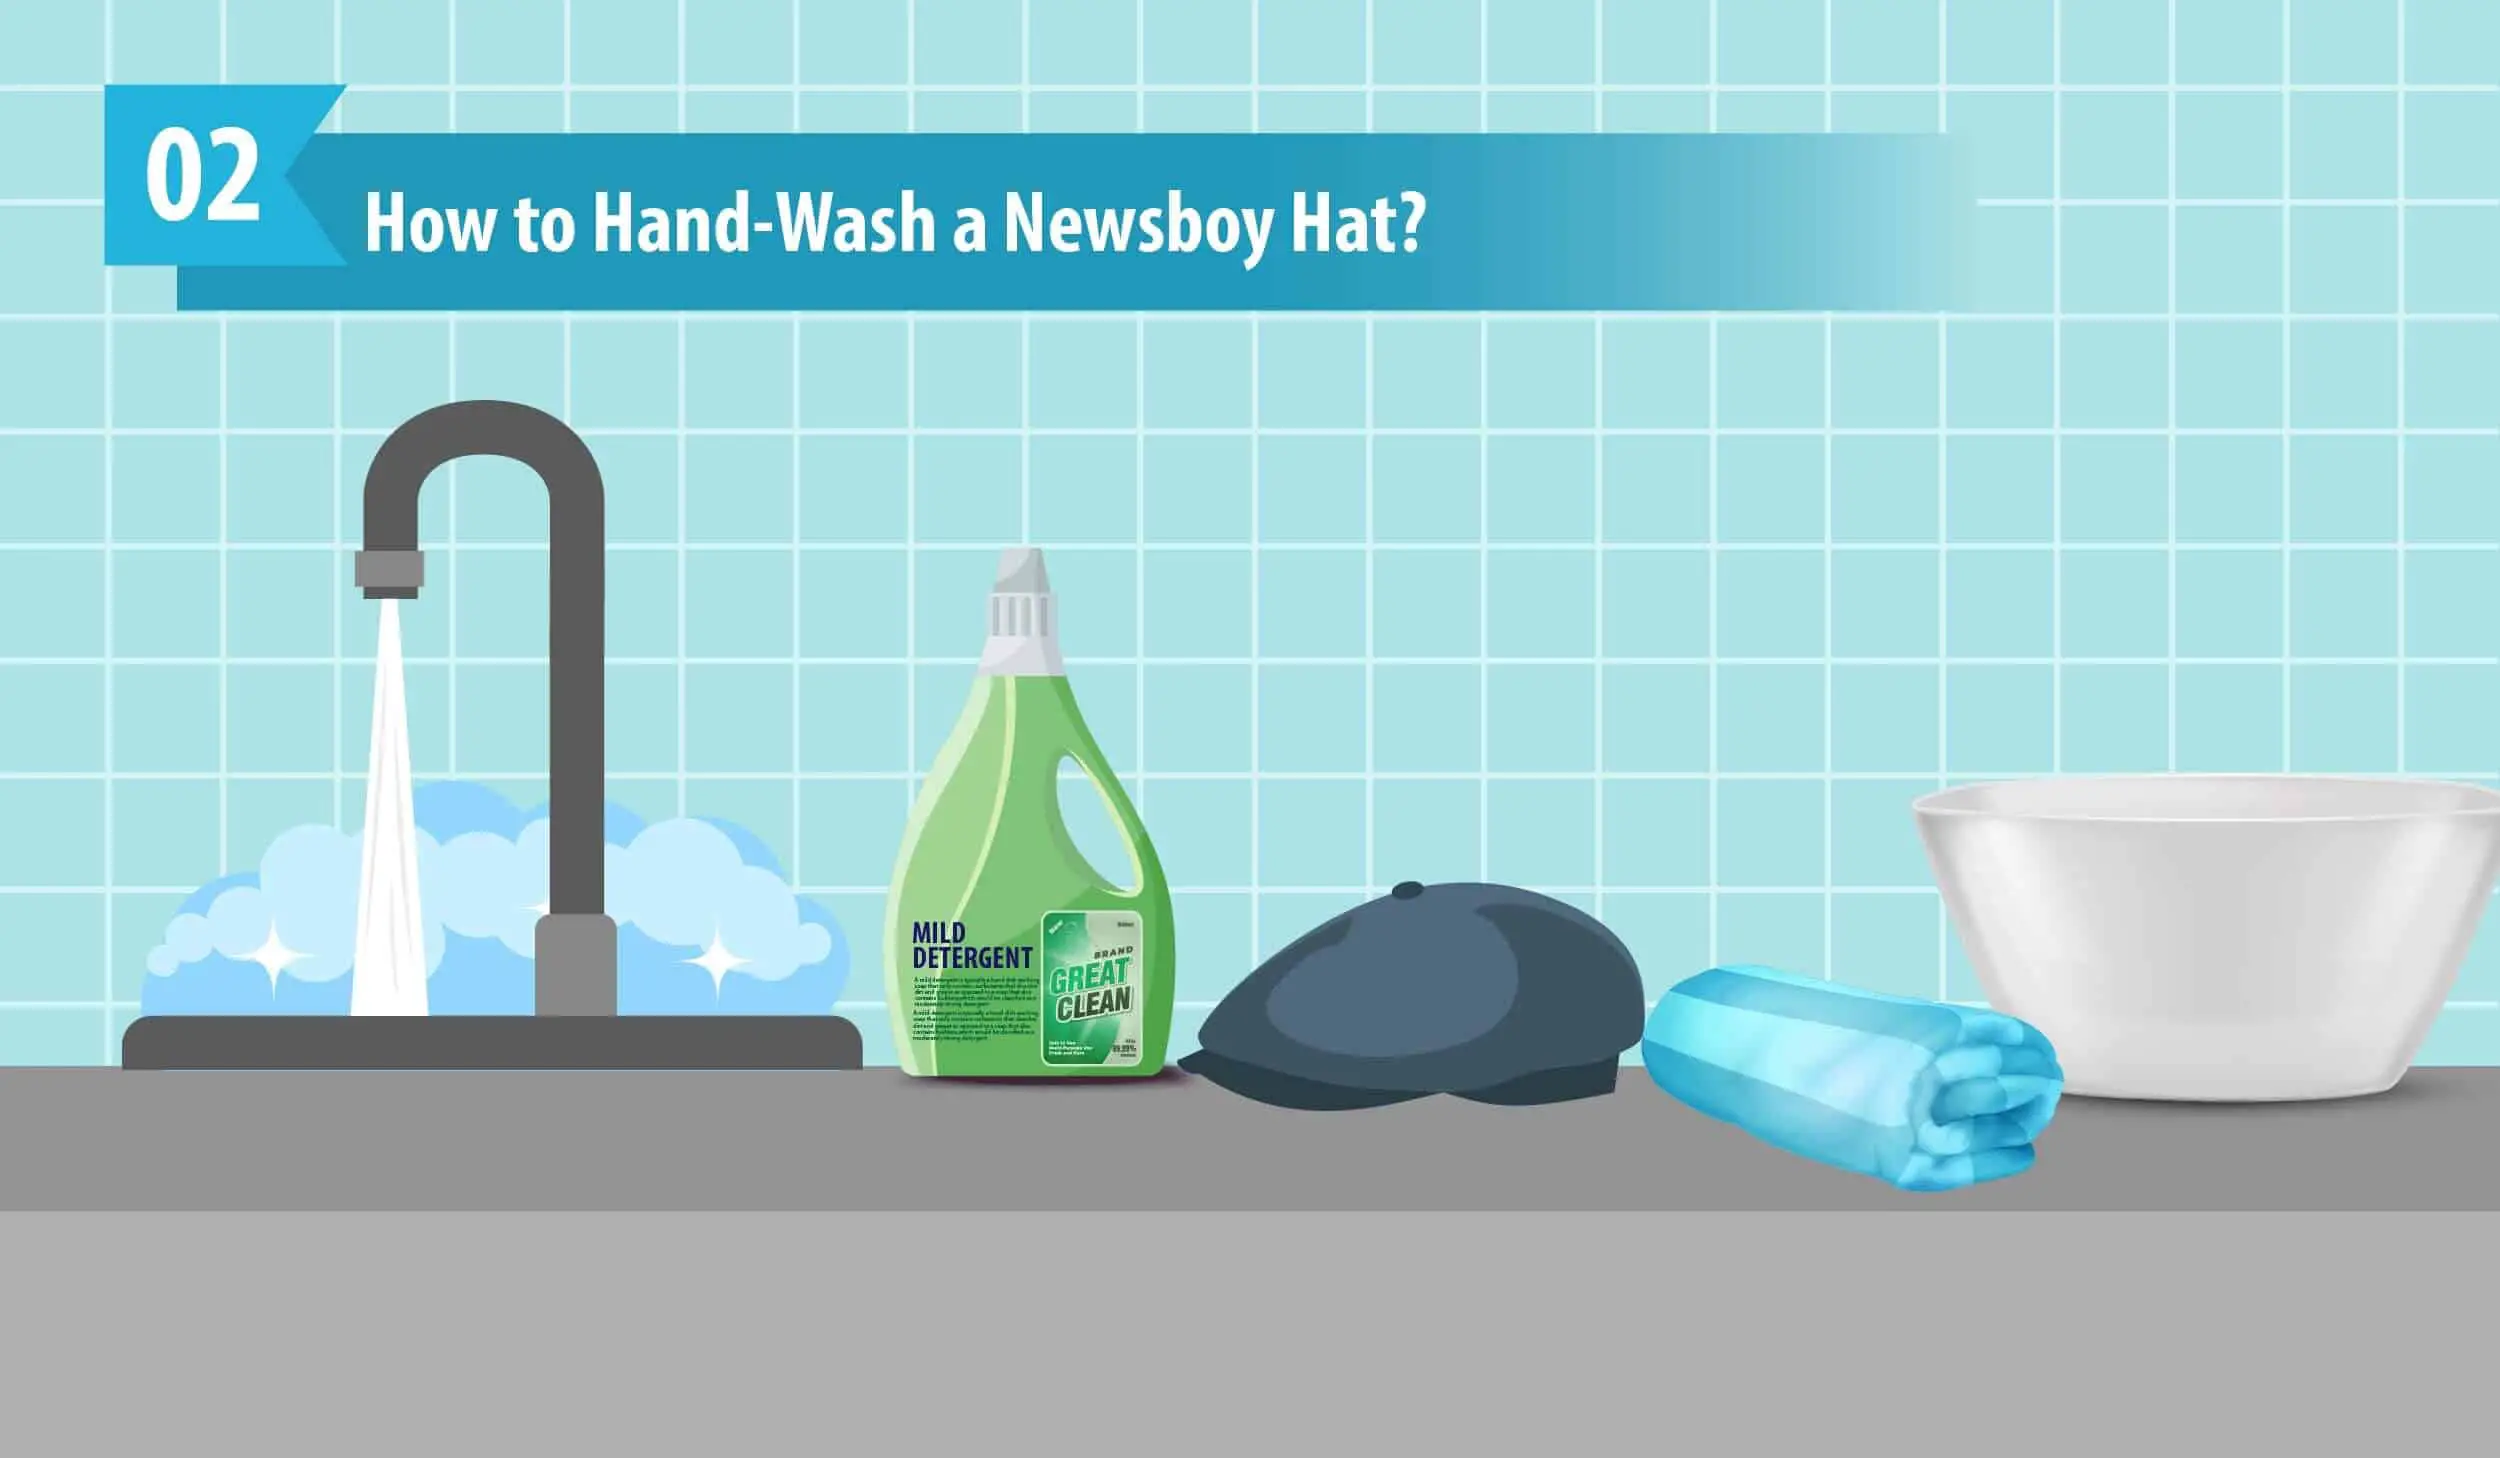 How to Hand-Wash a Newsboy Hat